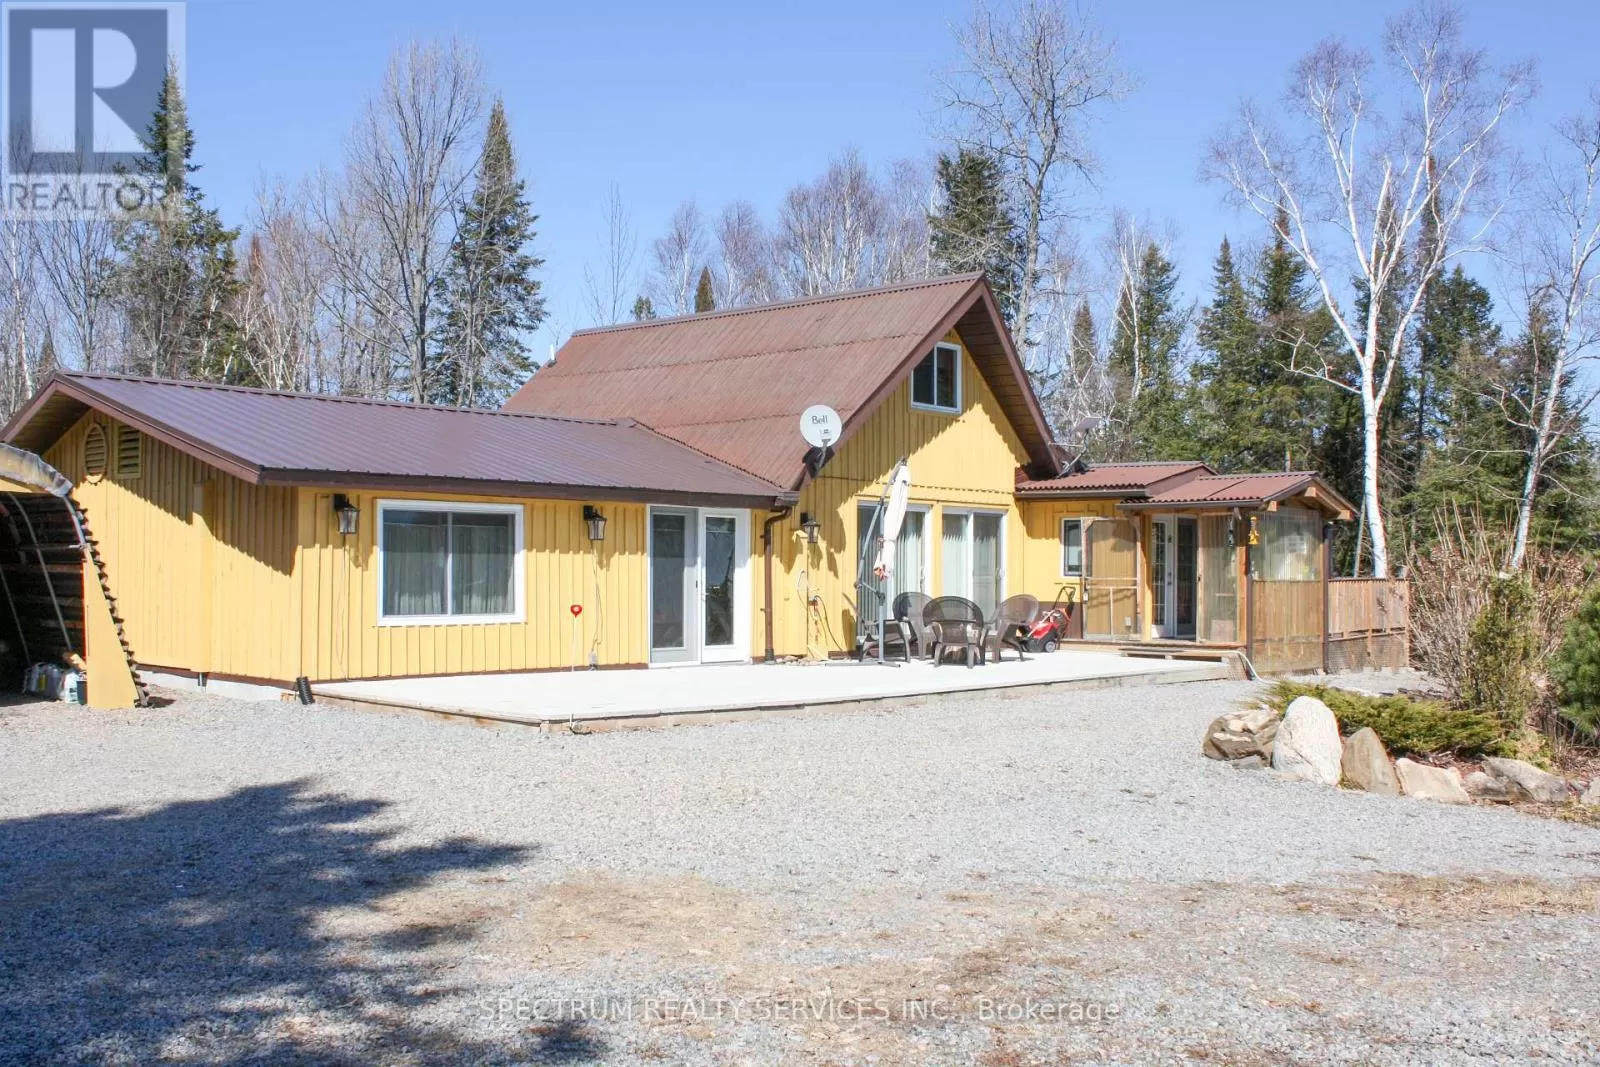 House for rent: 92 Lost Nation Rd, Brudenell, Lyndoch and Ragl, Ontario K0J 2E0